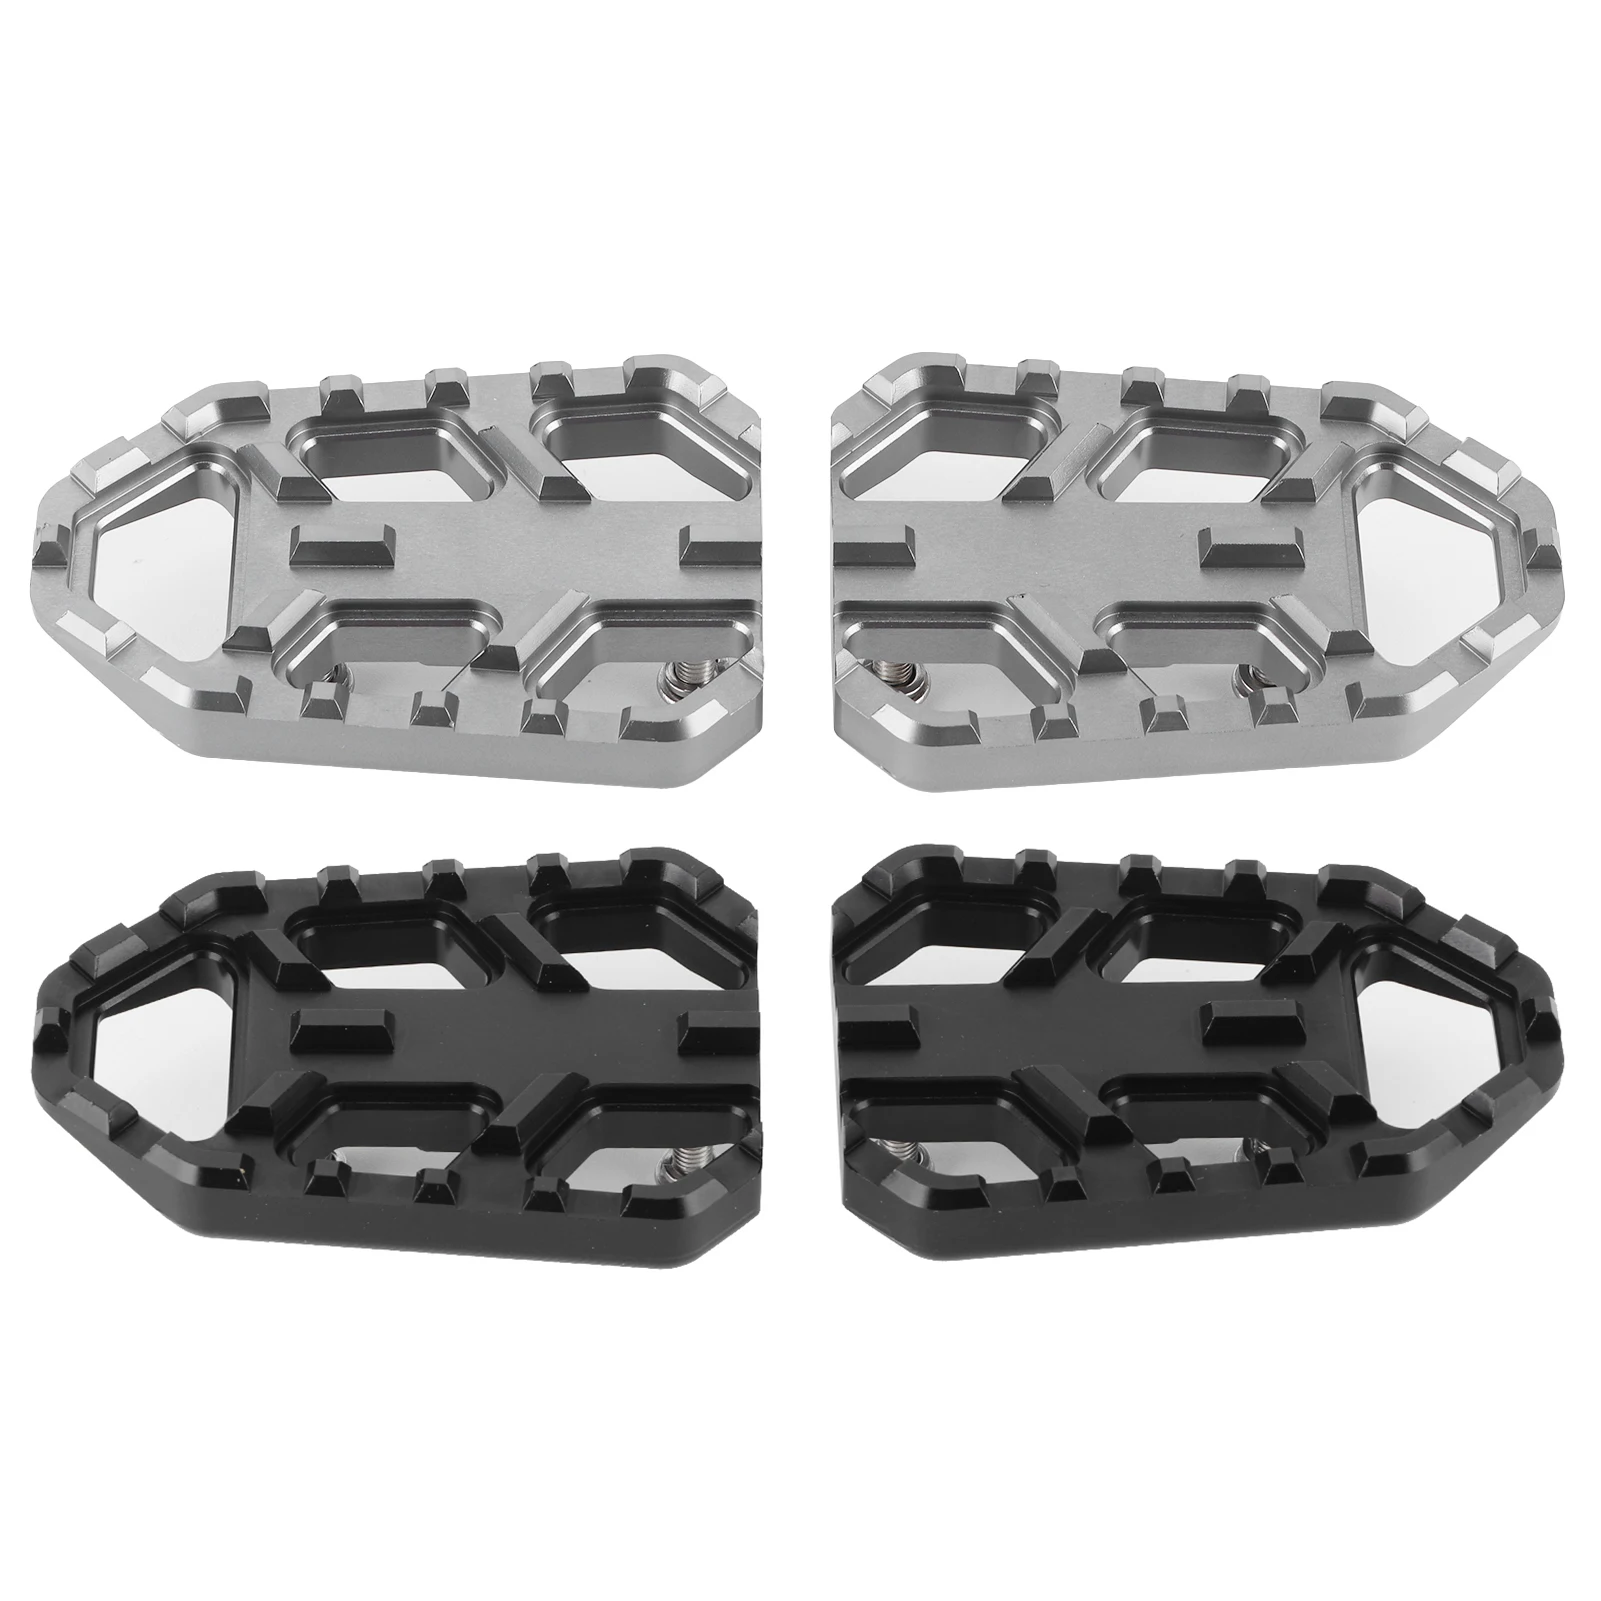 T motorcycle wide footrest cnc aluminum alloy pedals fit for suzuki dl650 dl1000 vstrom thumb200